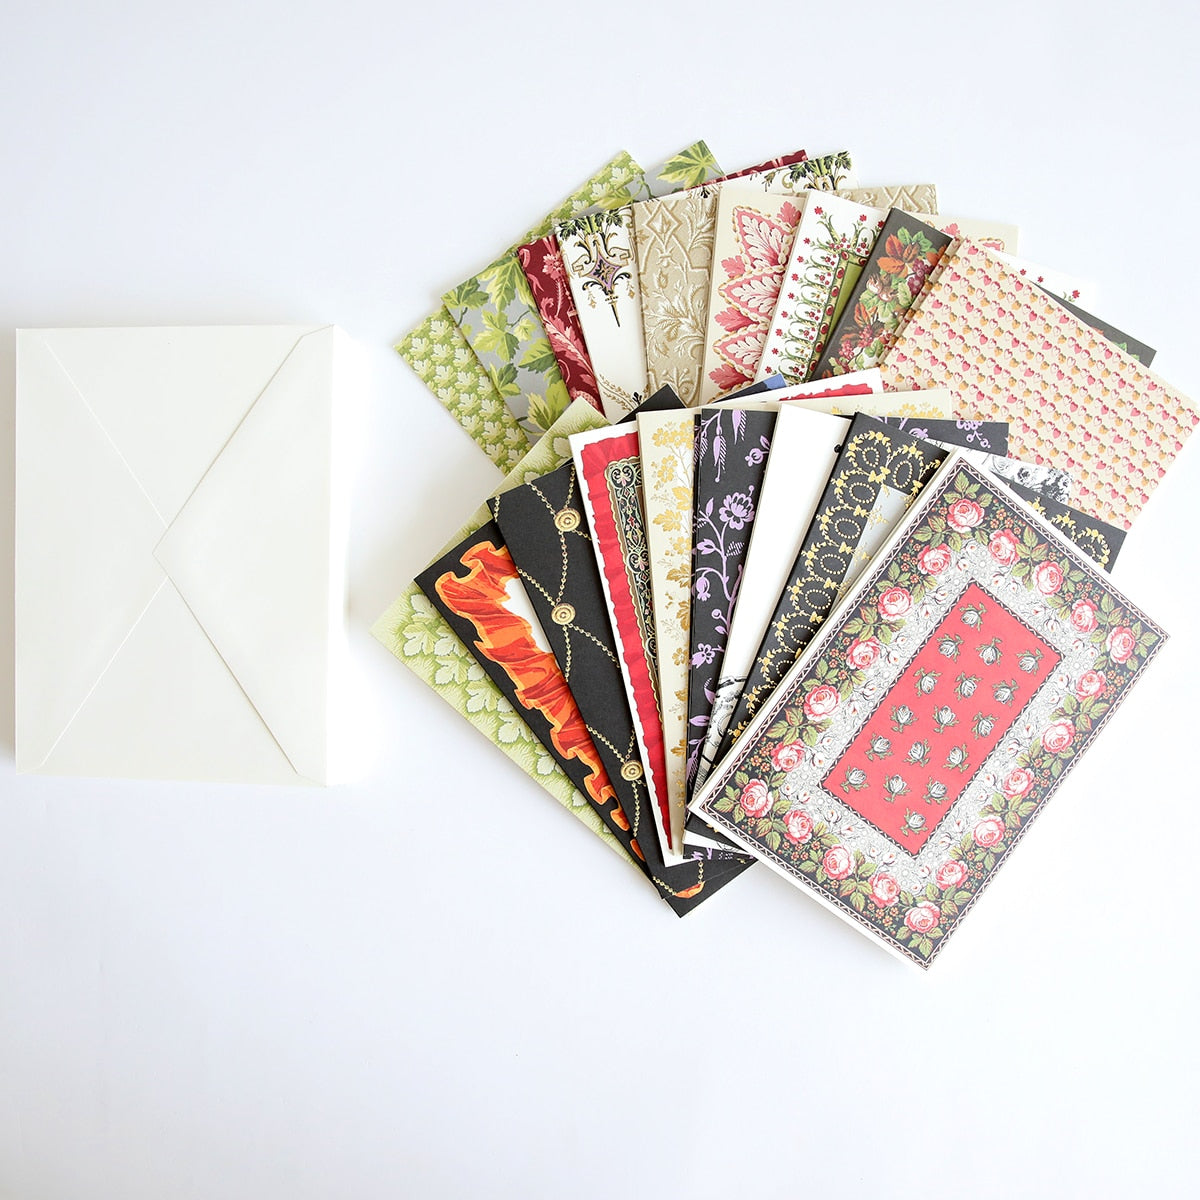 A collection of Fall Pattern Cards and Envelopes on a white surface.